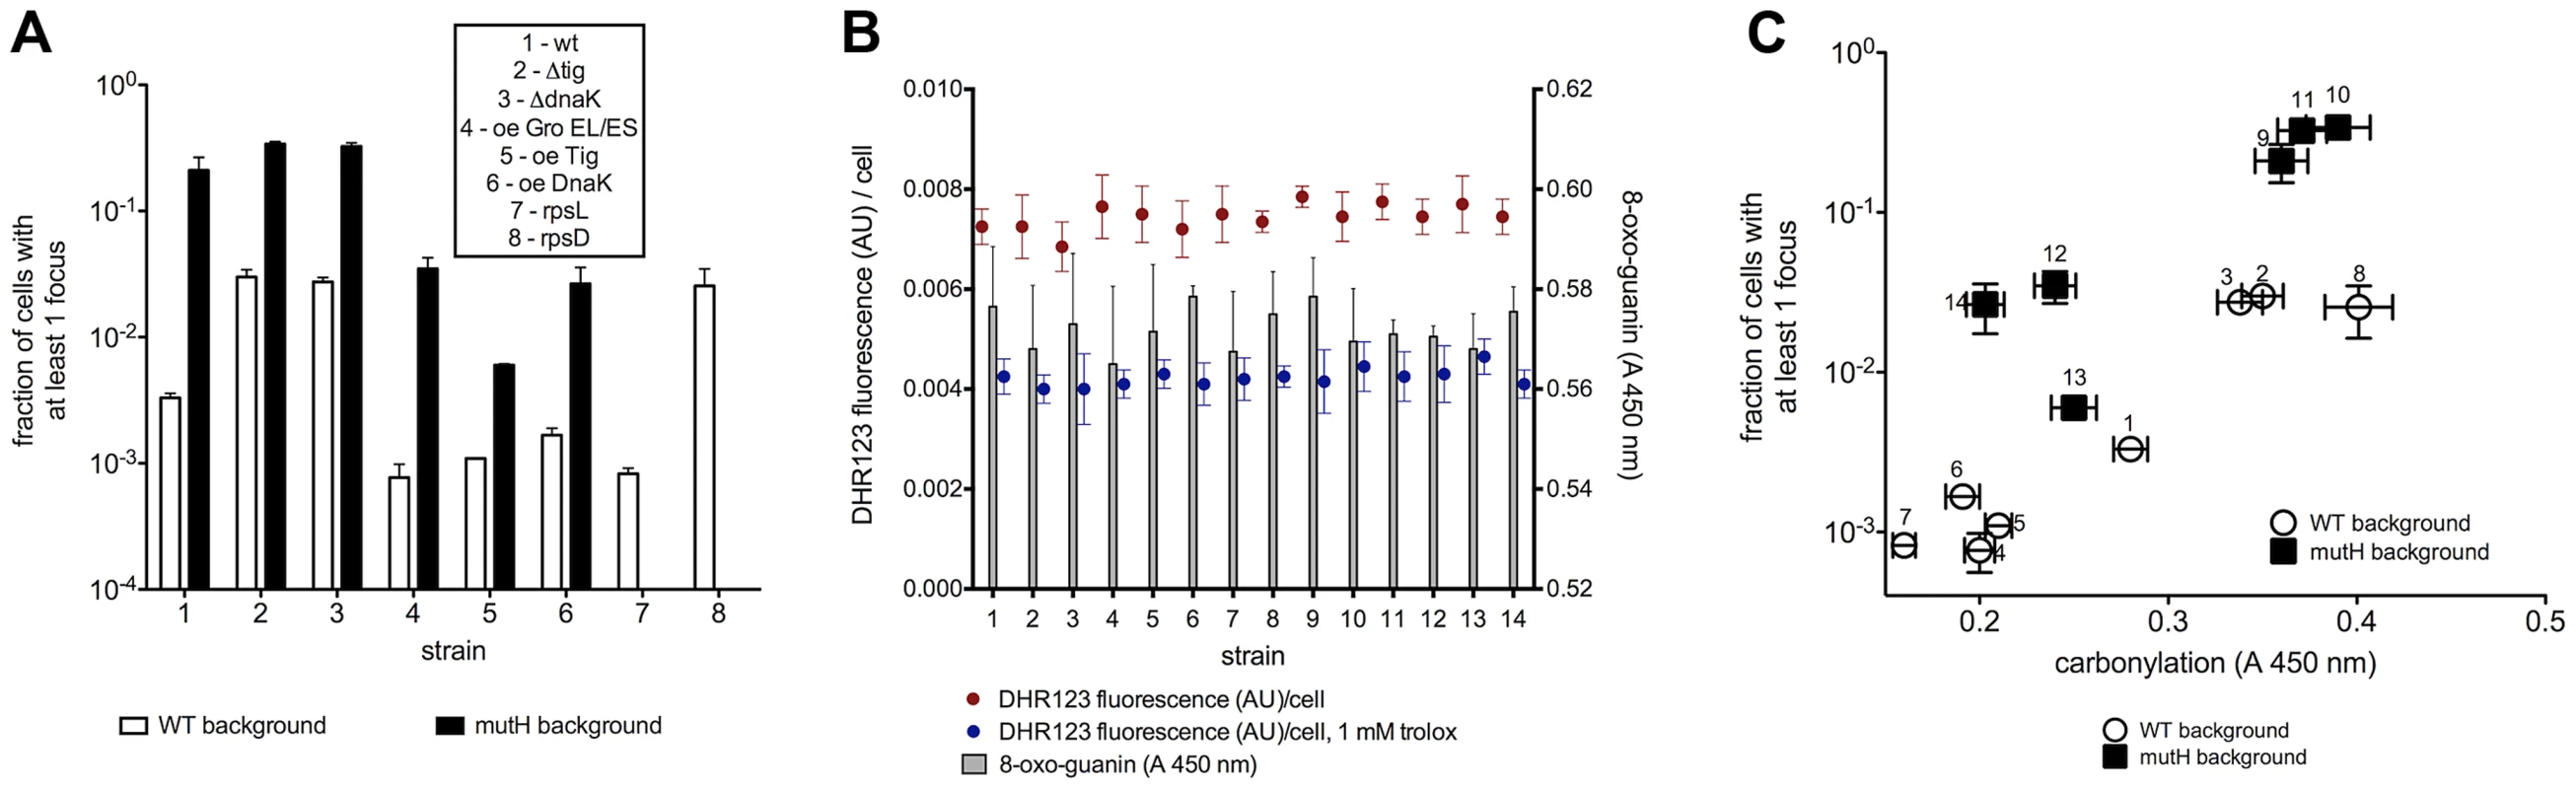 Mutation rate correlates with total proteome carbonylation.